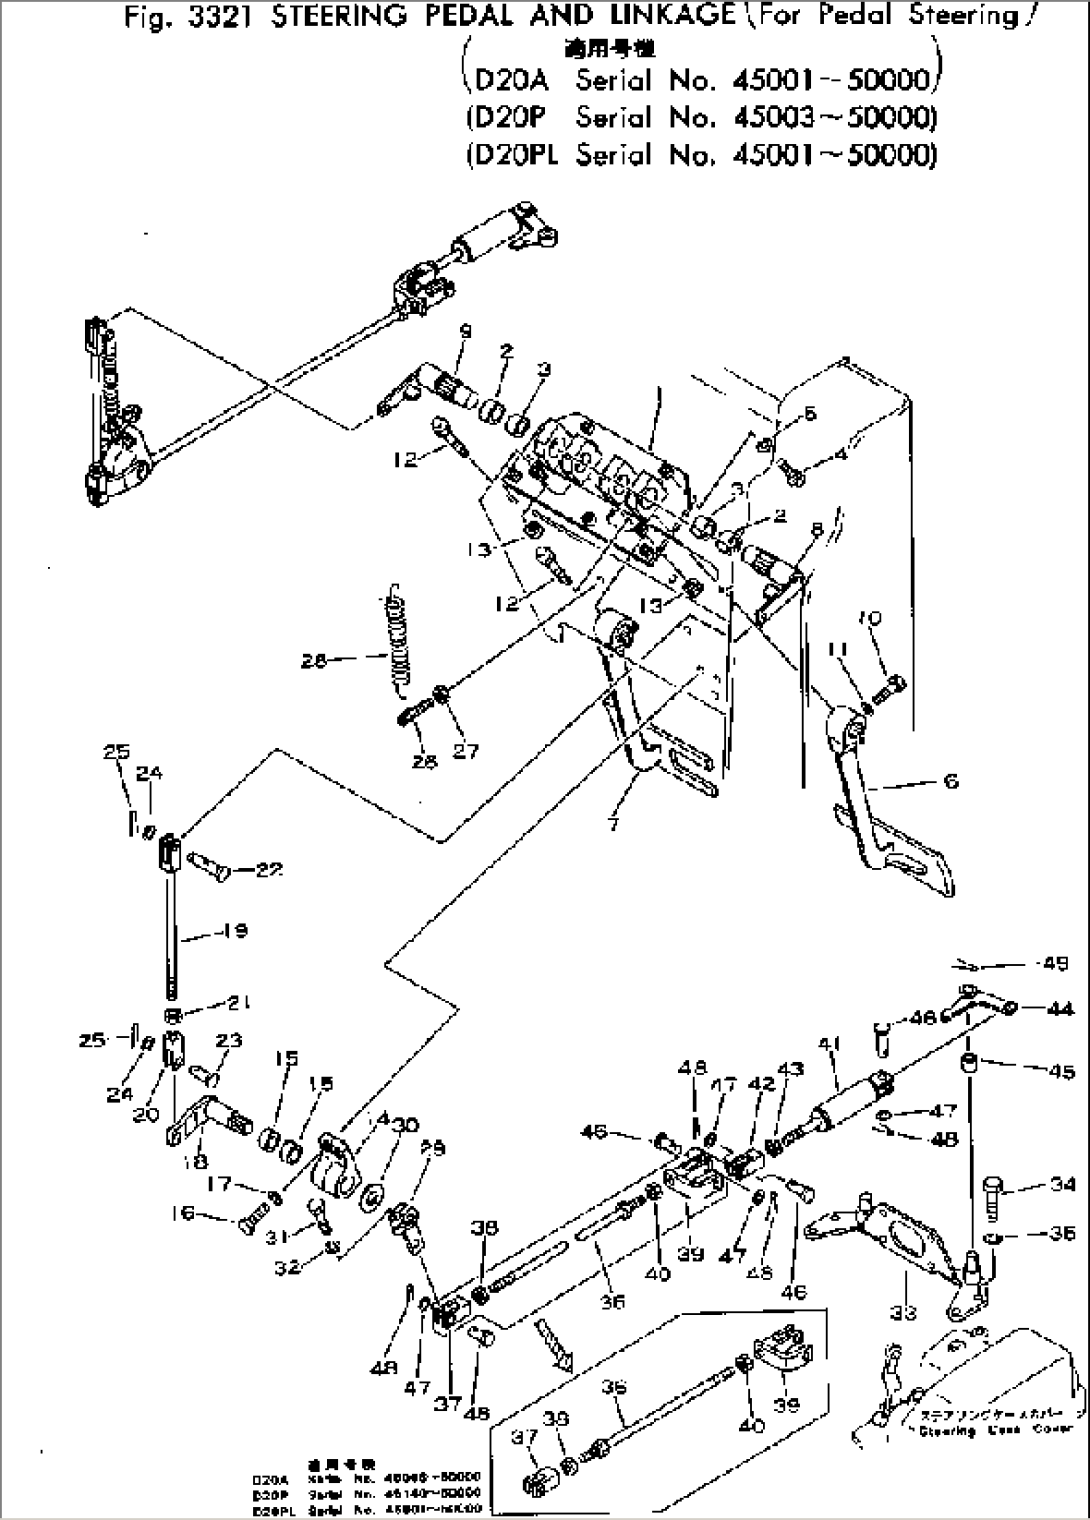 STEERING PEDAL AND LINKAGE (FOR PEDAL STEERING)(#45001-50000)